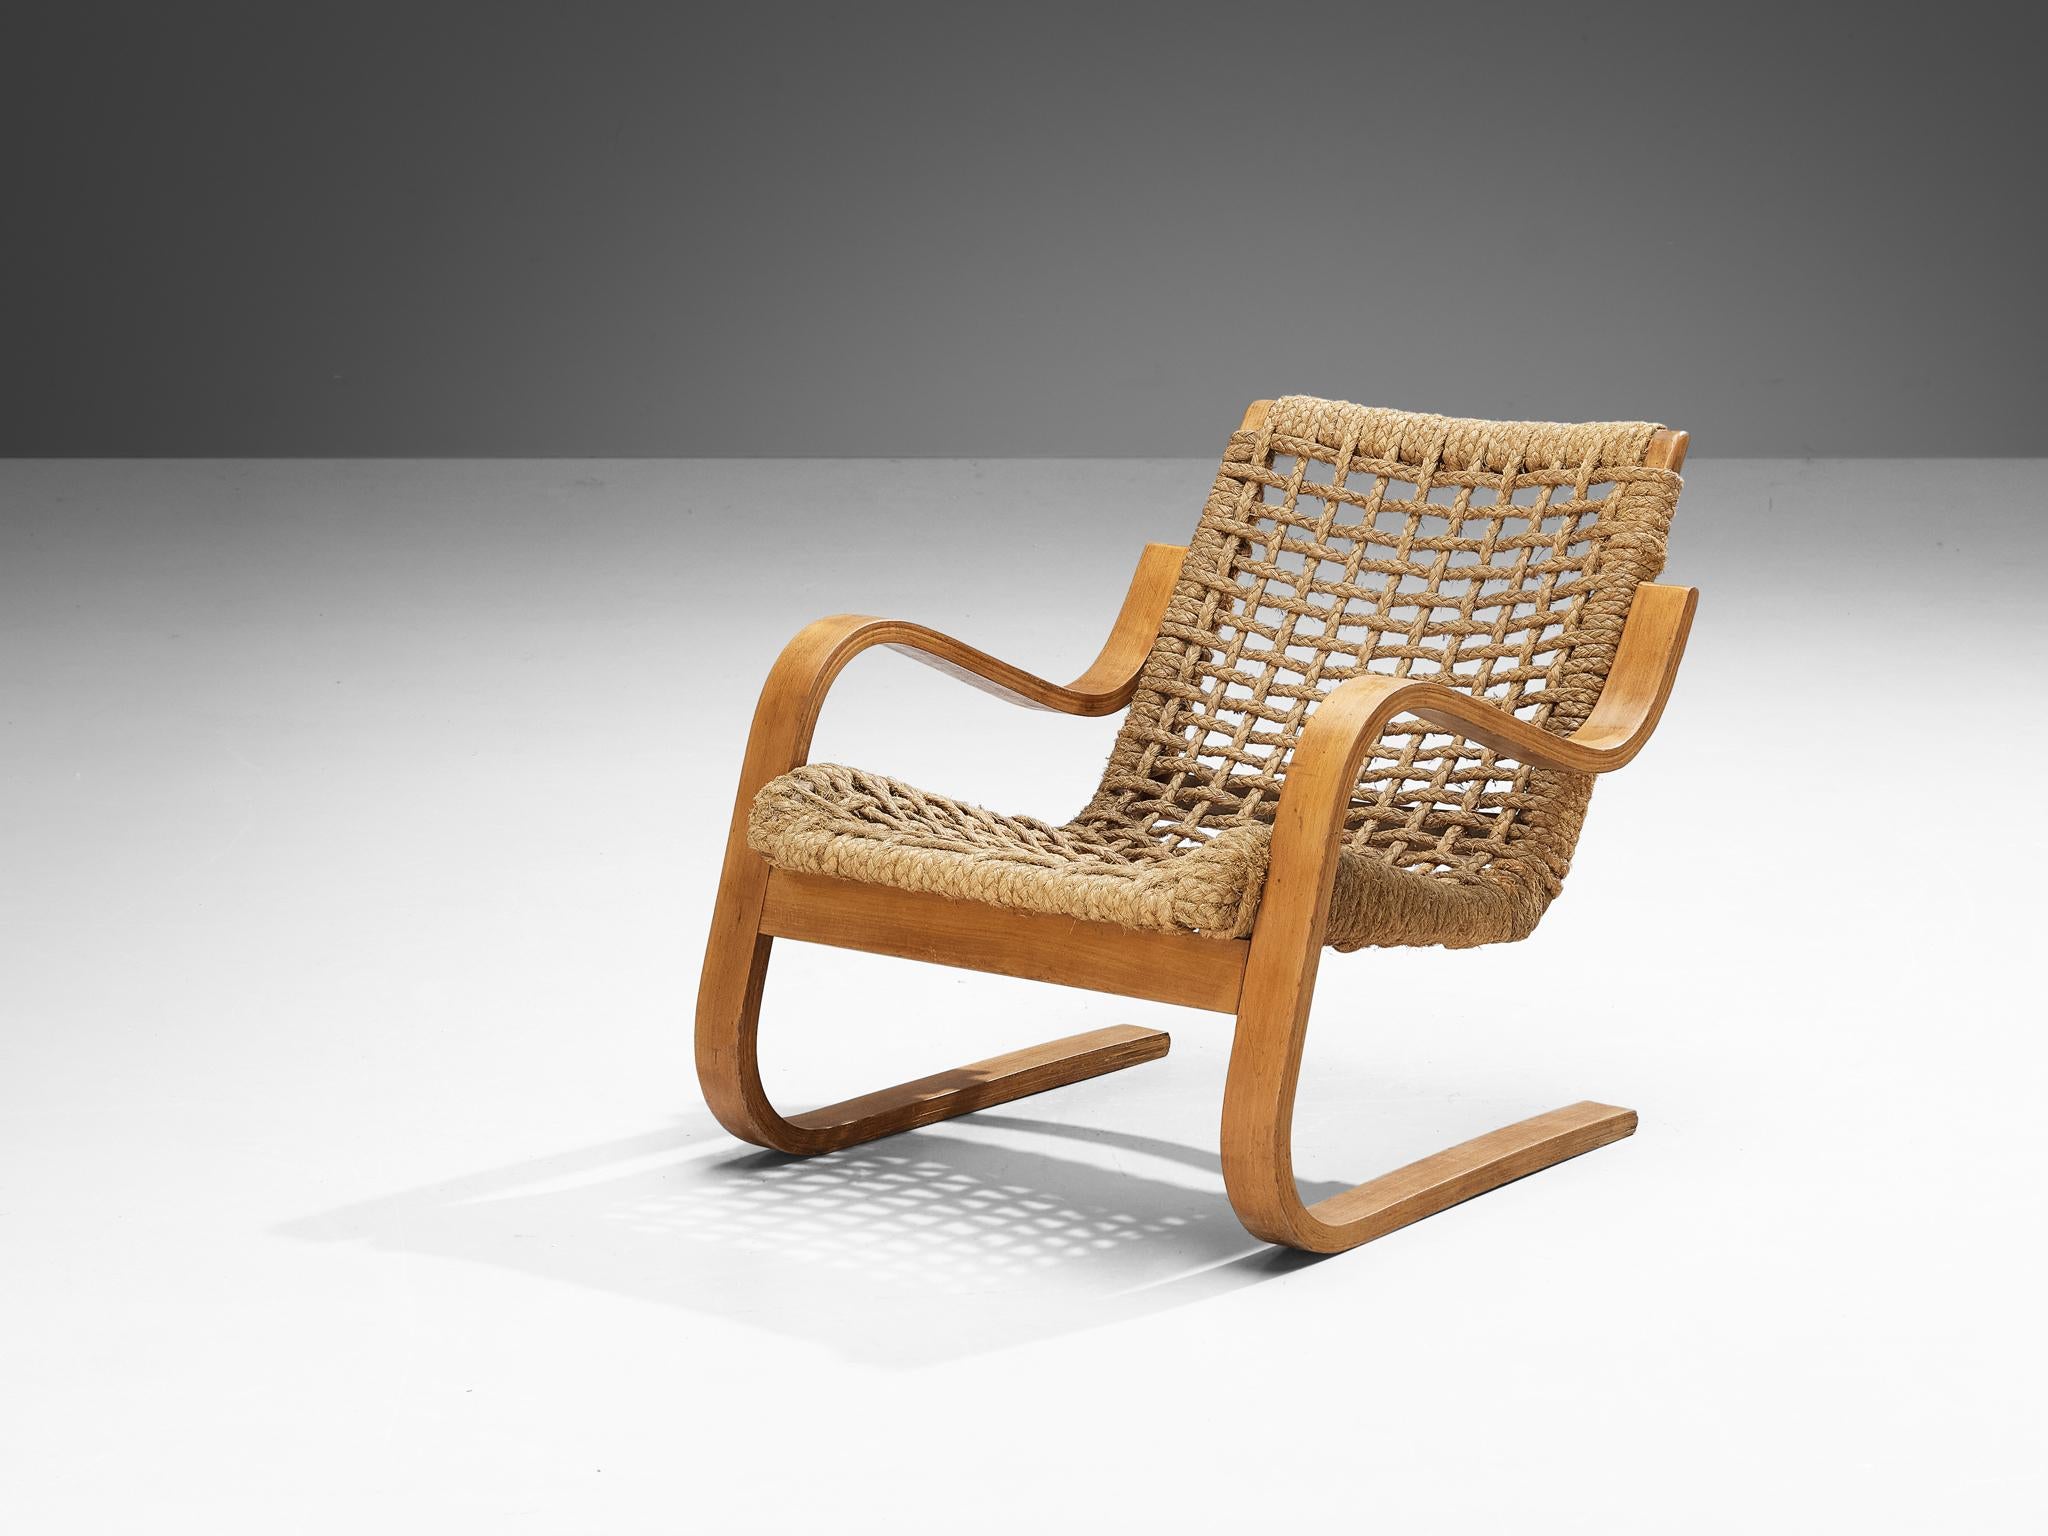 Rare 1930s Alvar Aalto for Stylclair in Plywood and Braided Straw